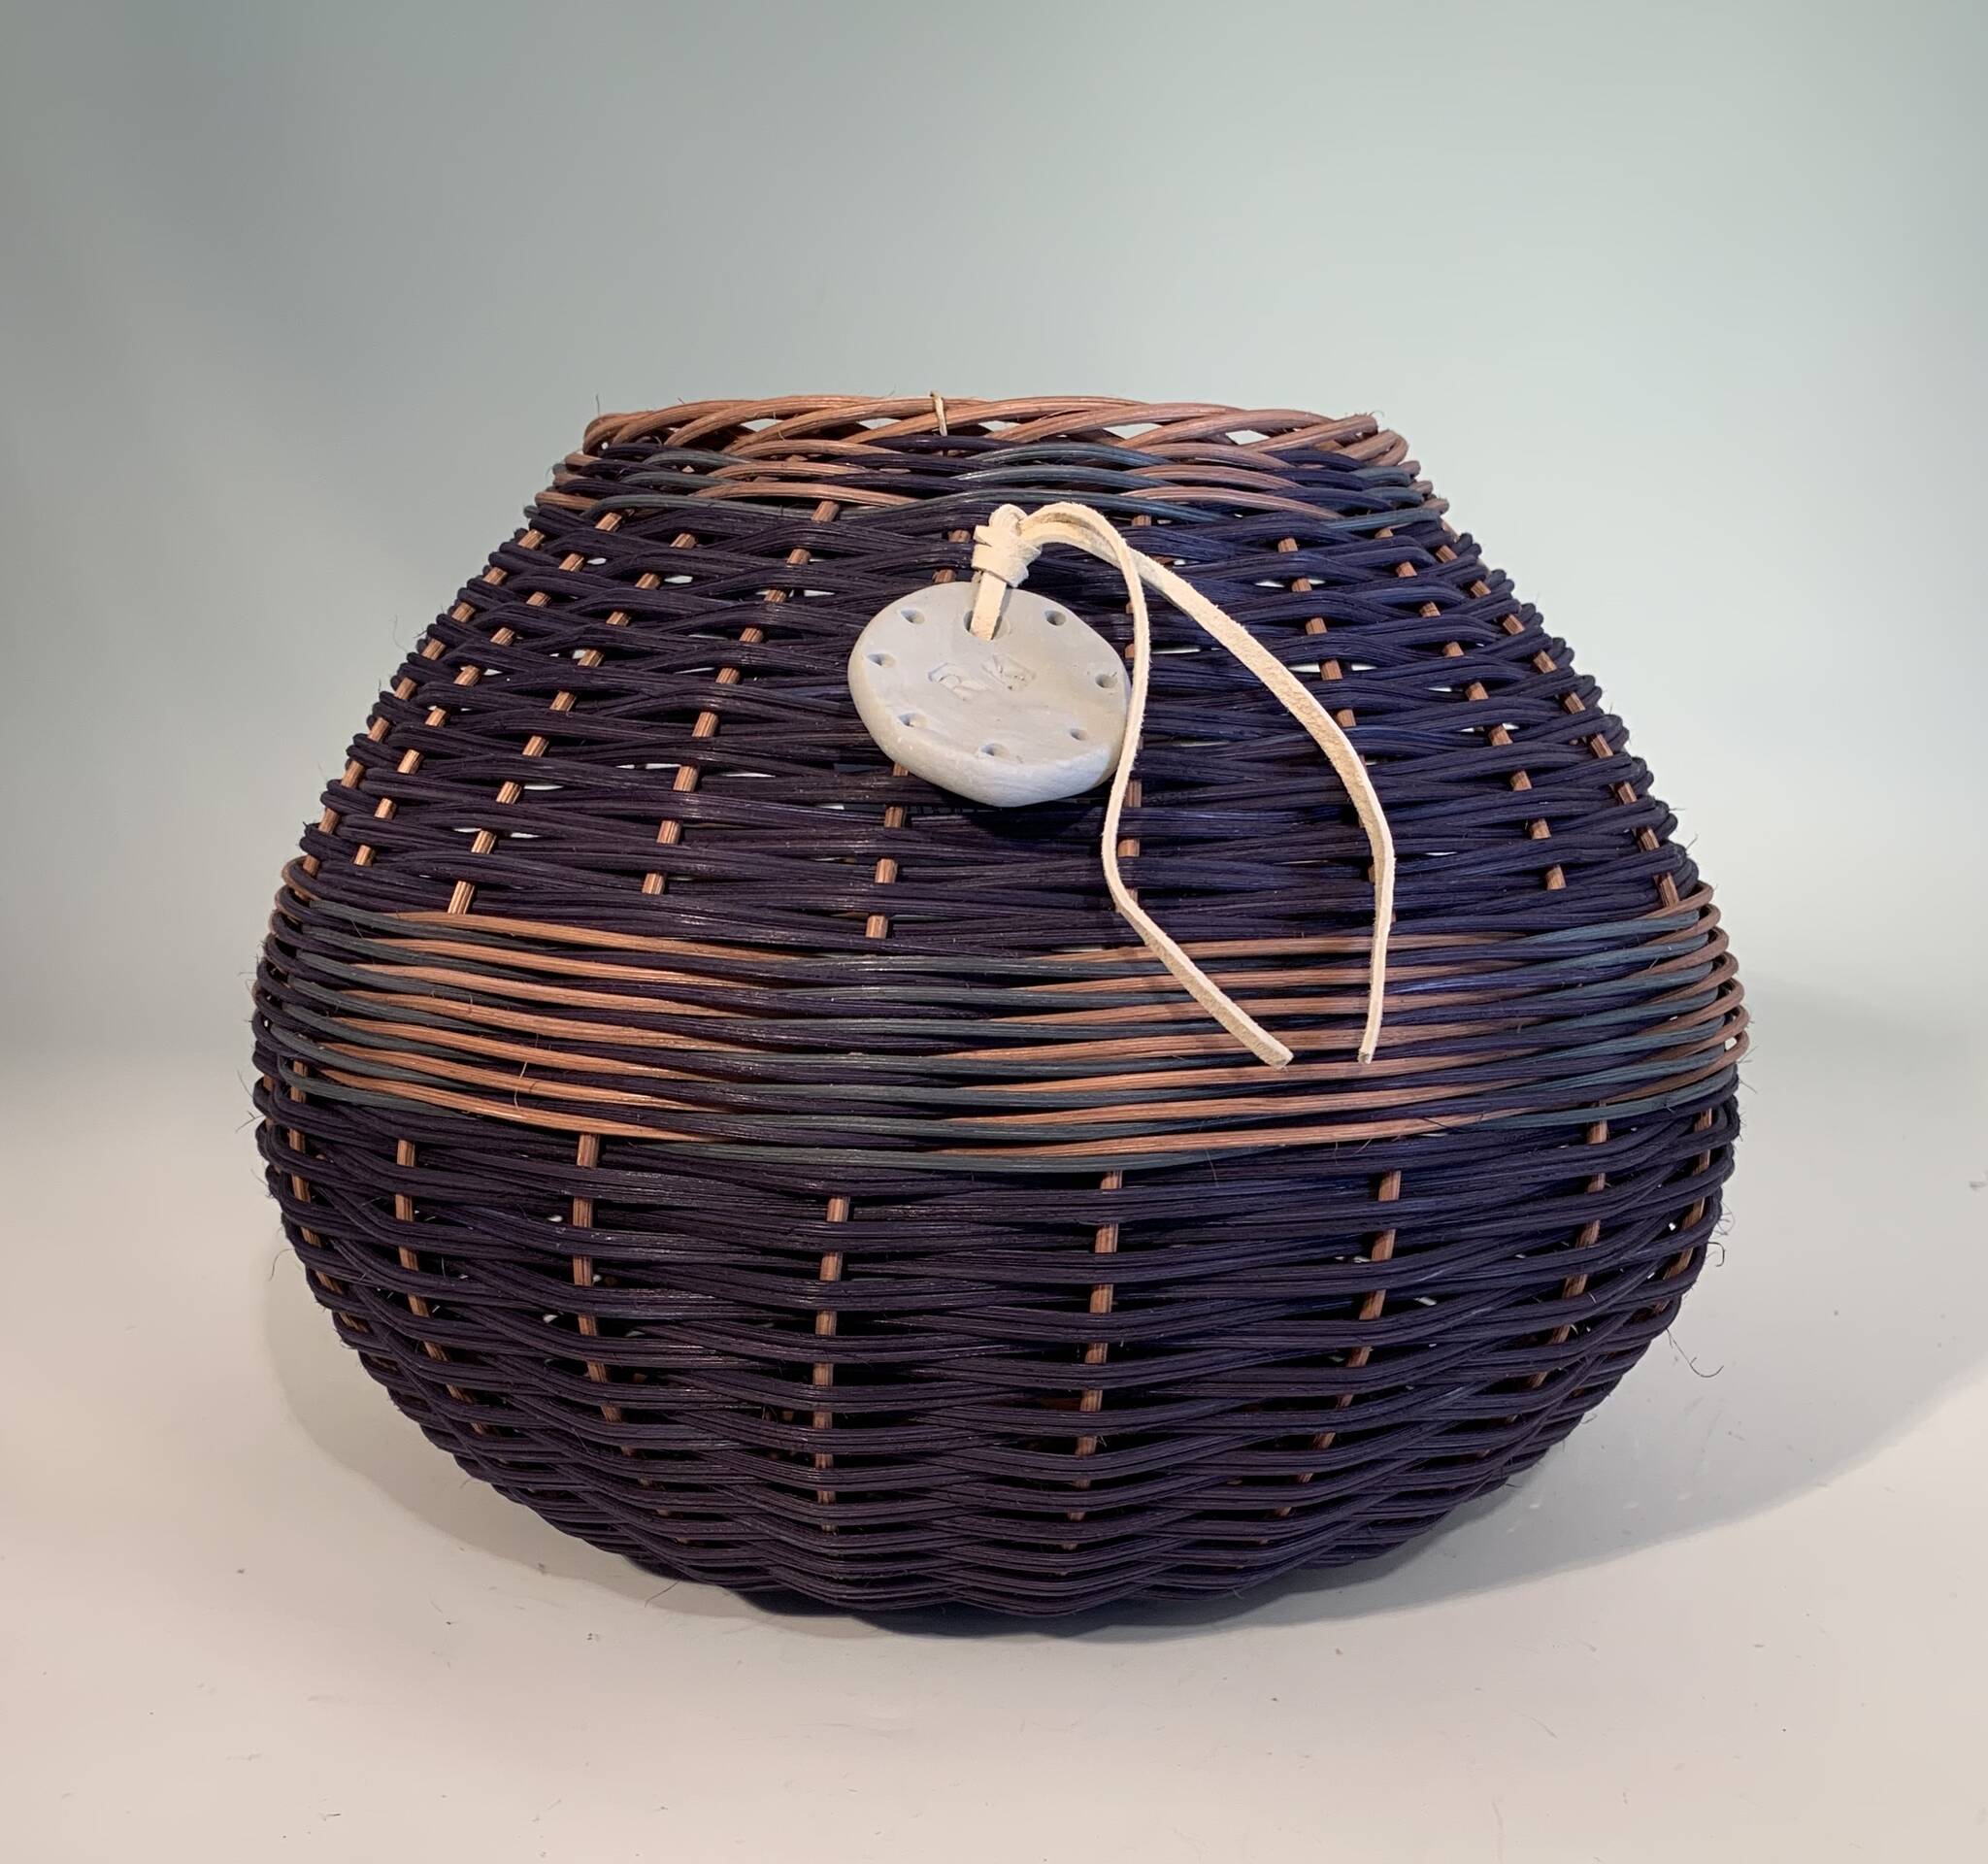 Basket weaver Reggie Kastler is known for her colorful baskets in all shapes and sizes. (Photo provided)